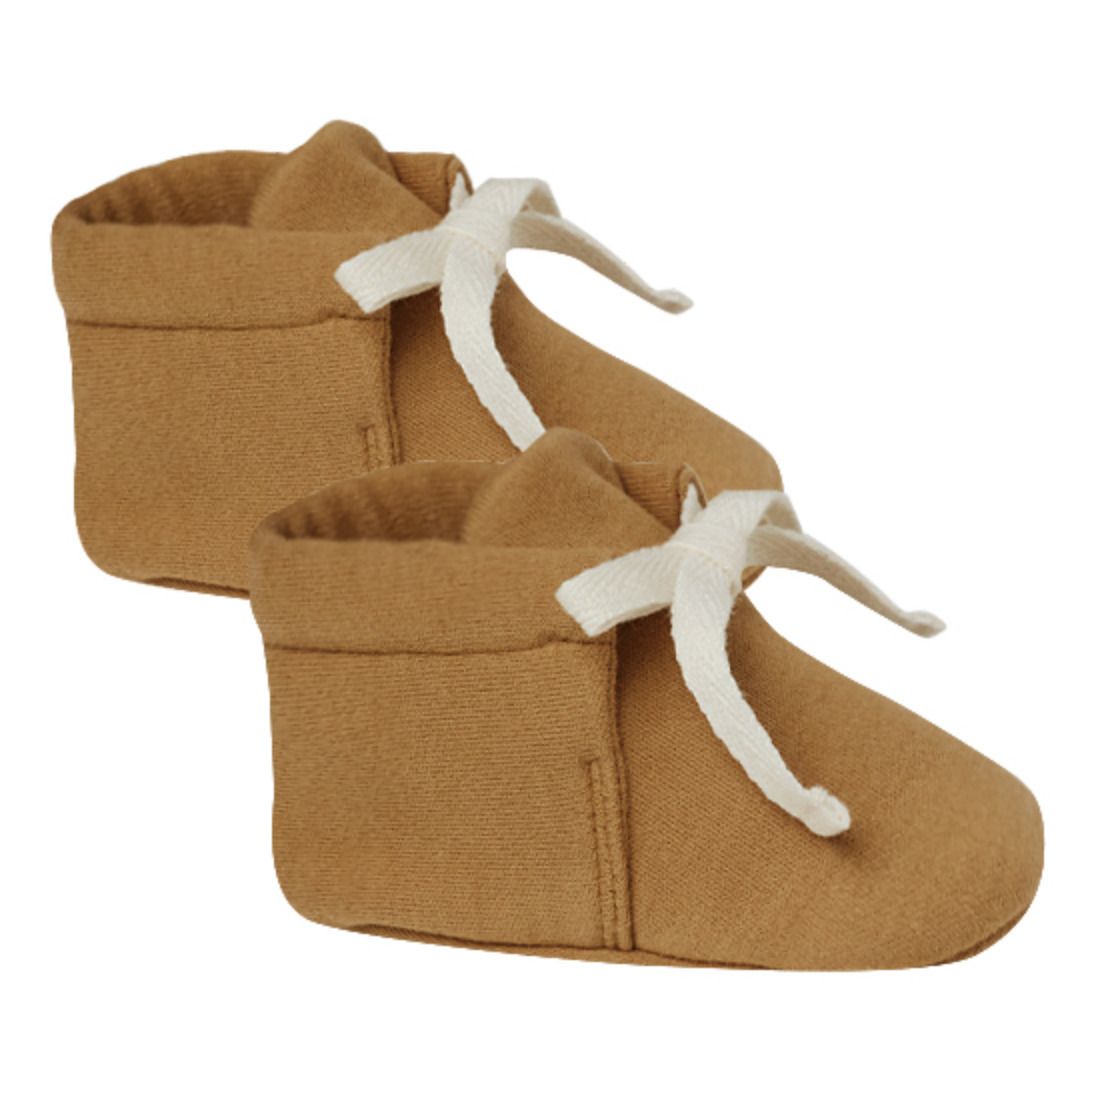 Quincy Mae - Chaussons Coton Bio - Fille - Camel